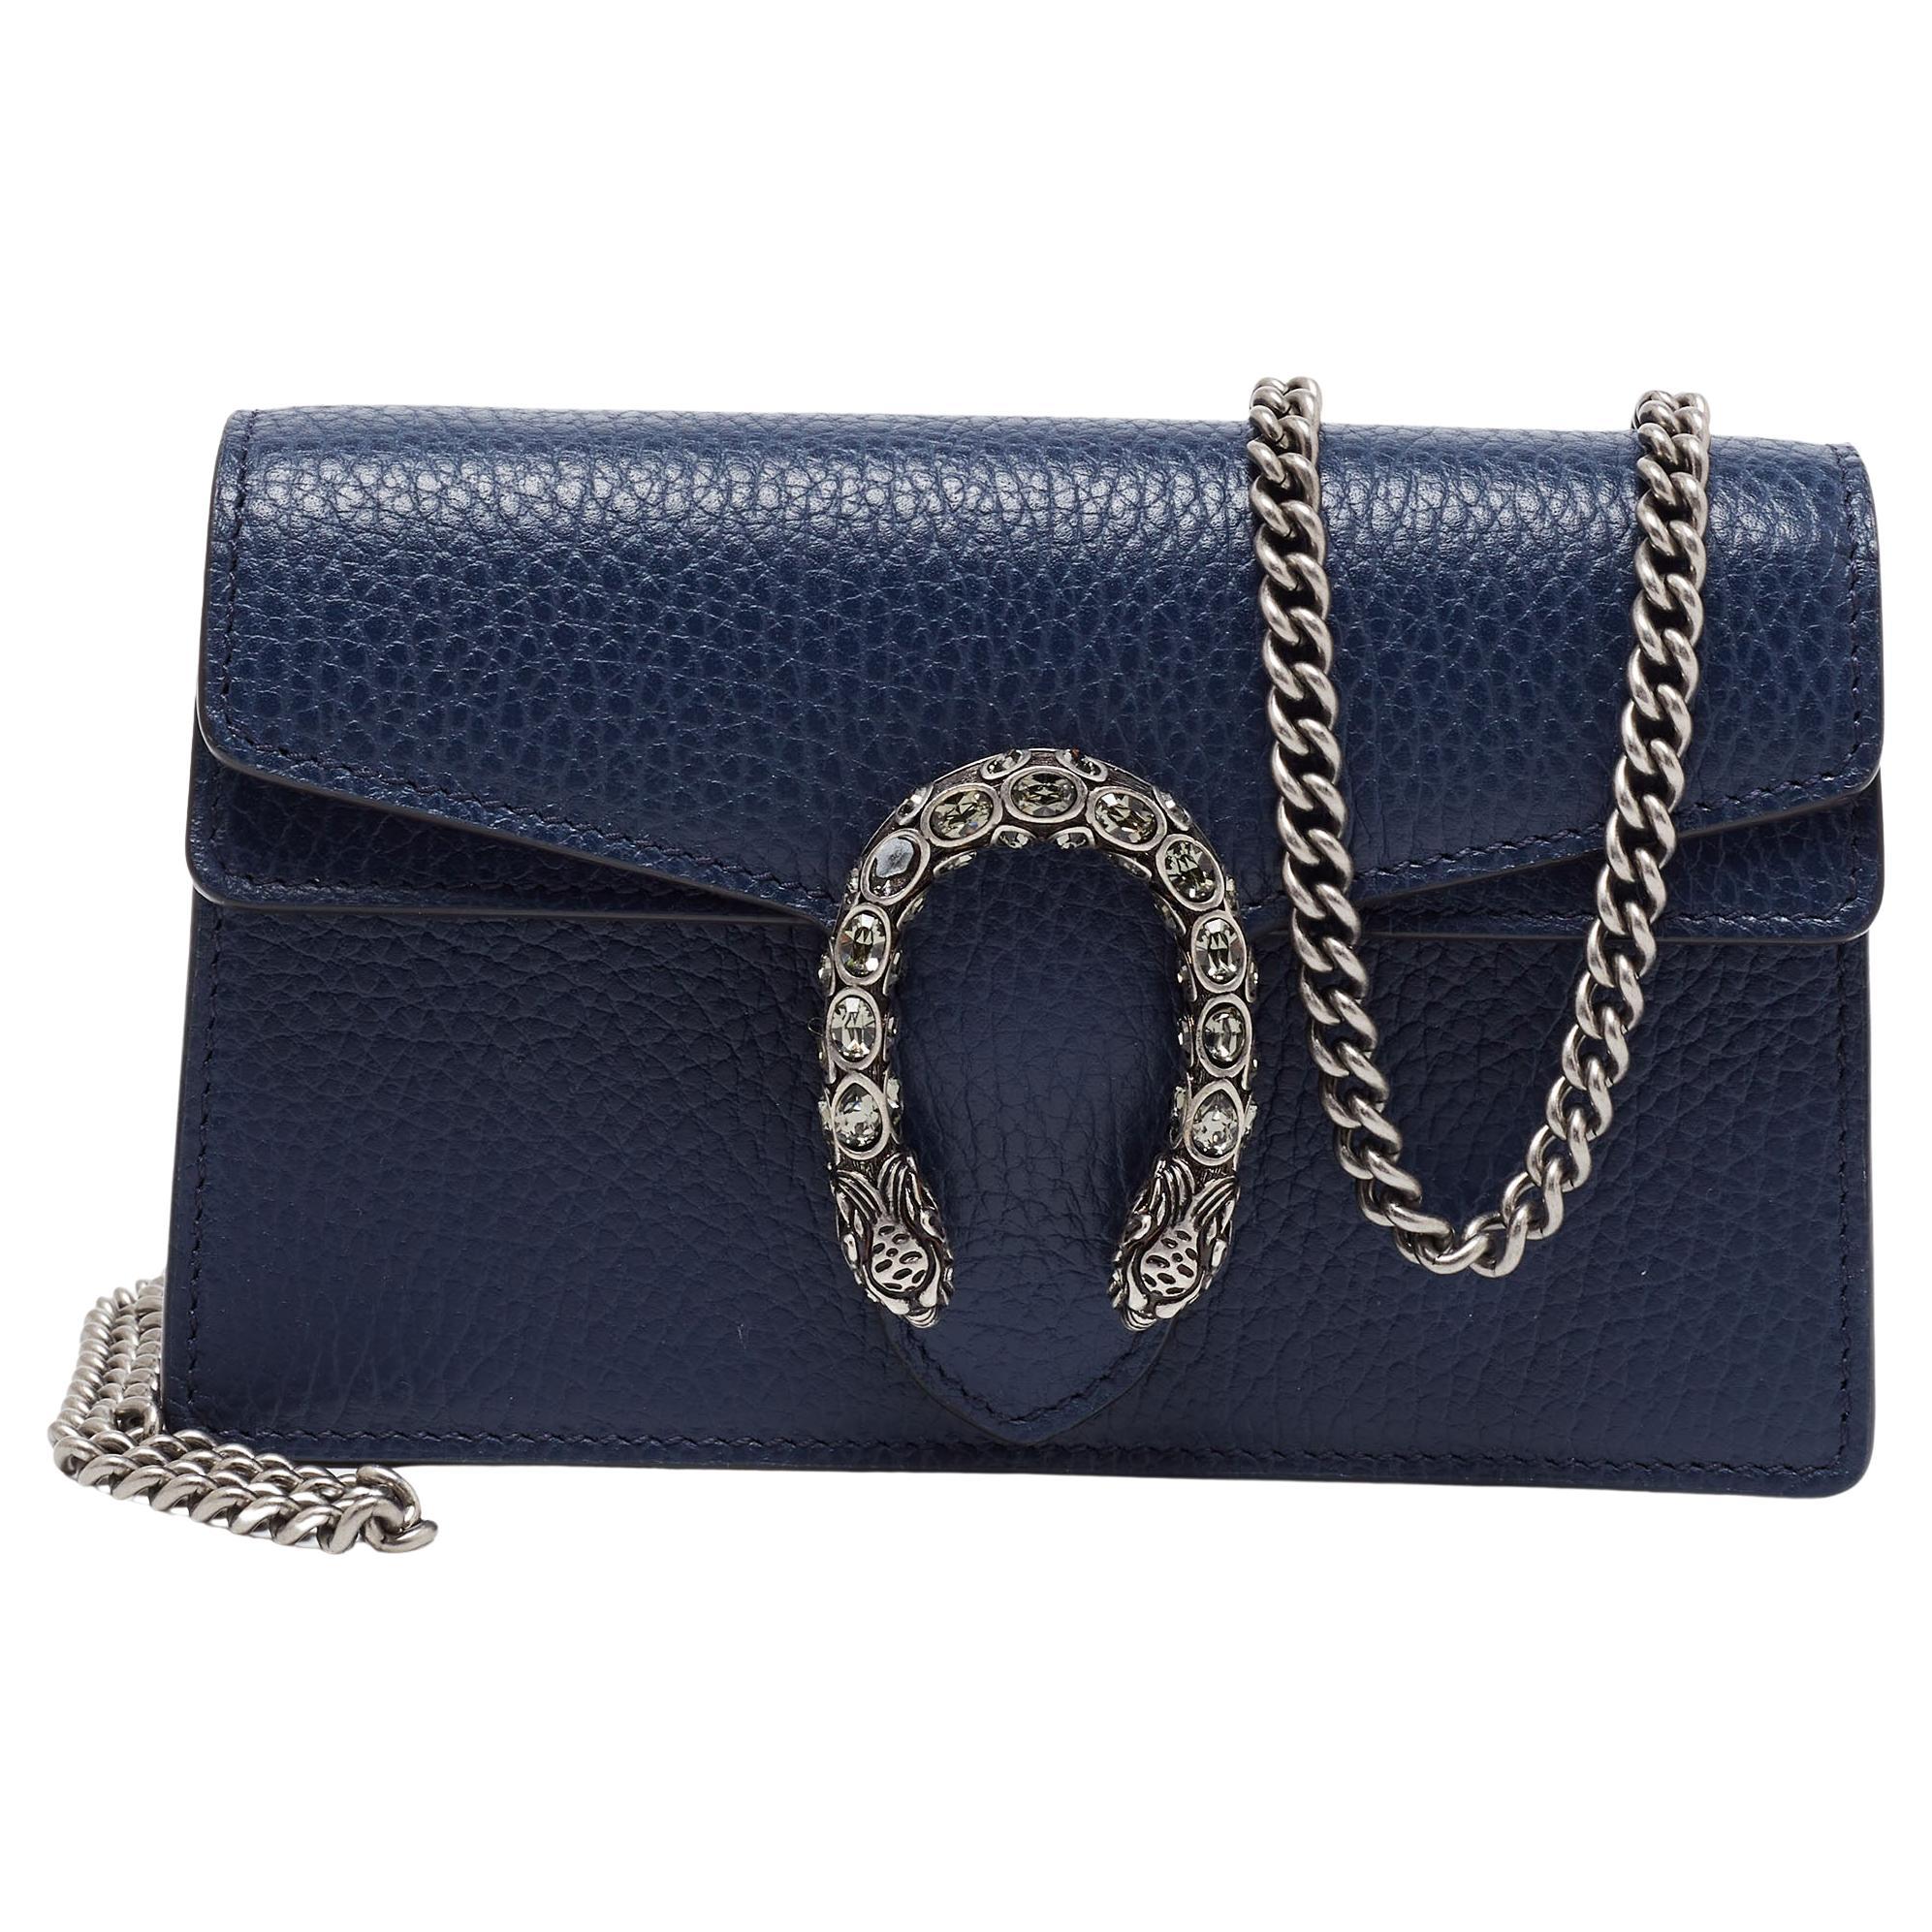 Gucci Navy Blue Leather Dionysus Super Mini Wallet on Chain